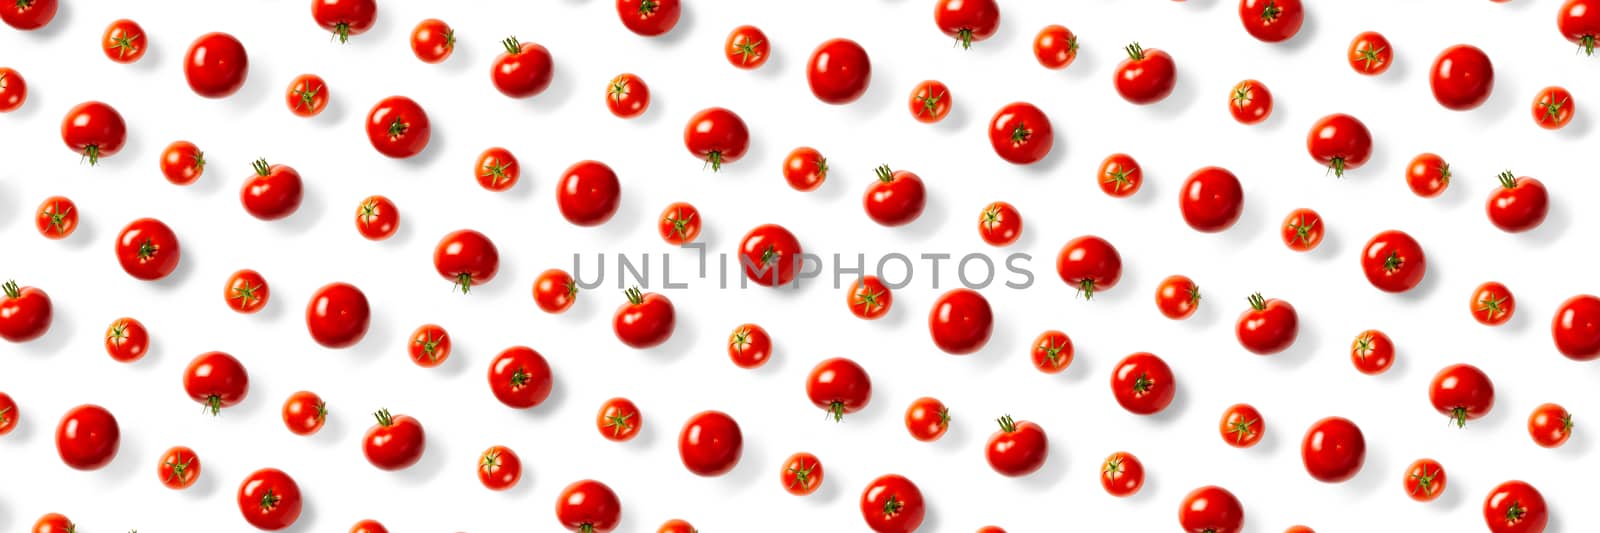 banner - creative background from red tomatoes. Abstract background. of isolated ripe Tomato on the white background not seamless pattern. flat lay